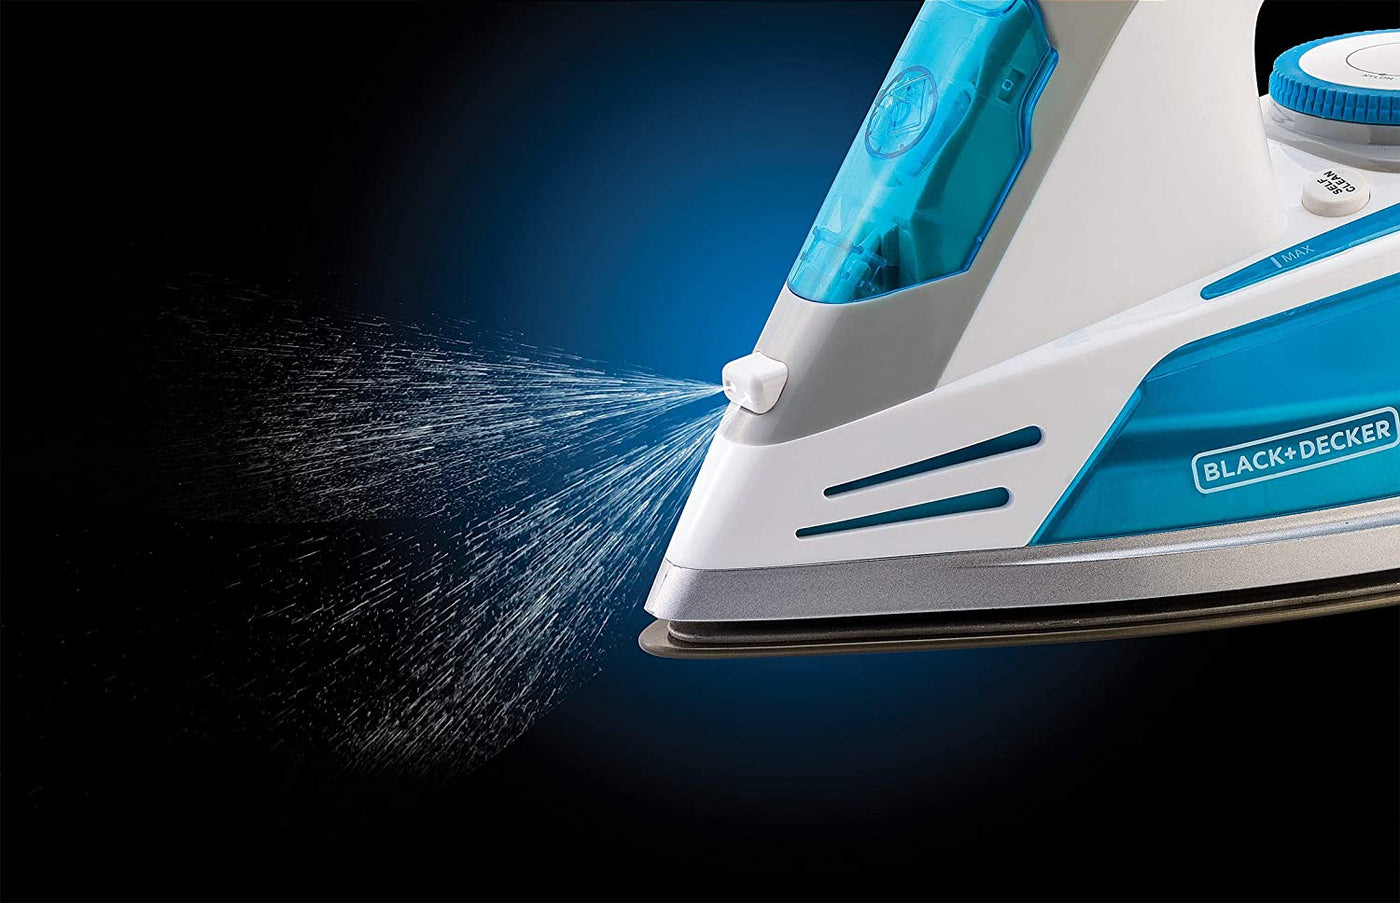 Brown Box 2800W 2 Way Auto Shut-Off Anti Drip, Anodized Sole Plate Variable Steam Iron, Blue